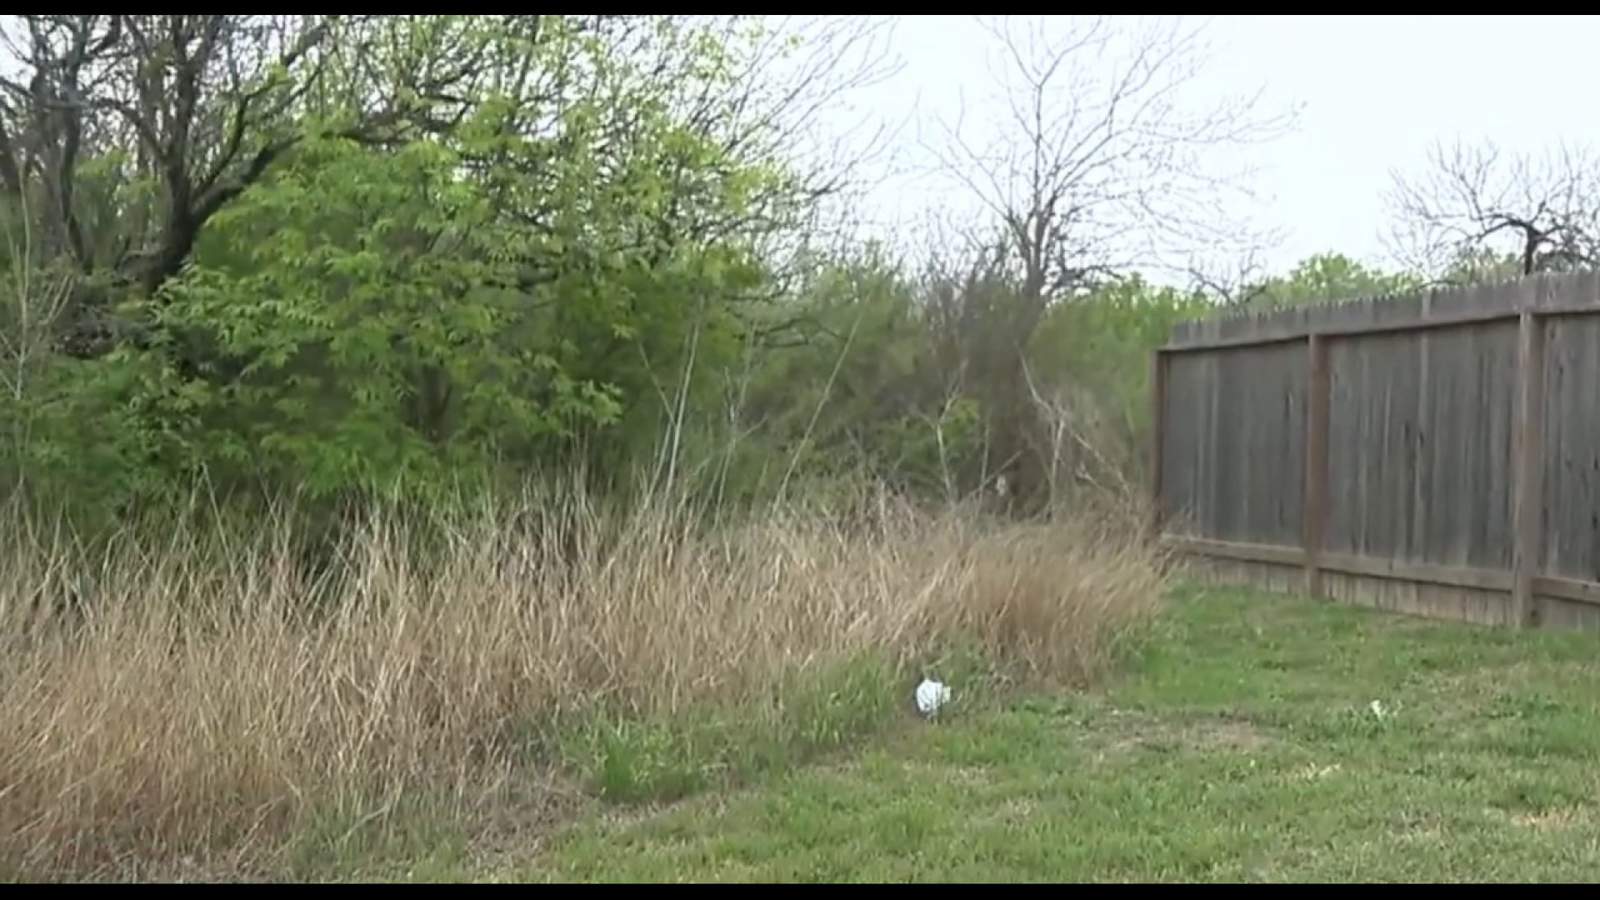 Brush removal in Converse underway to help protect neighborhood